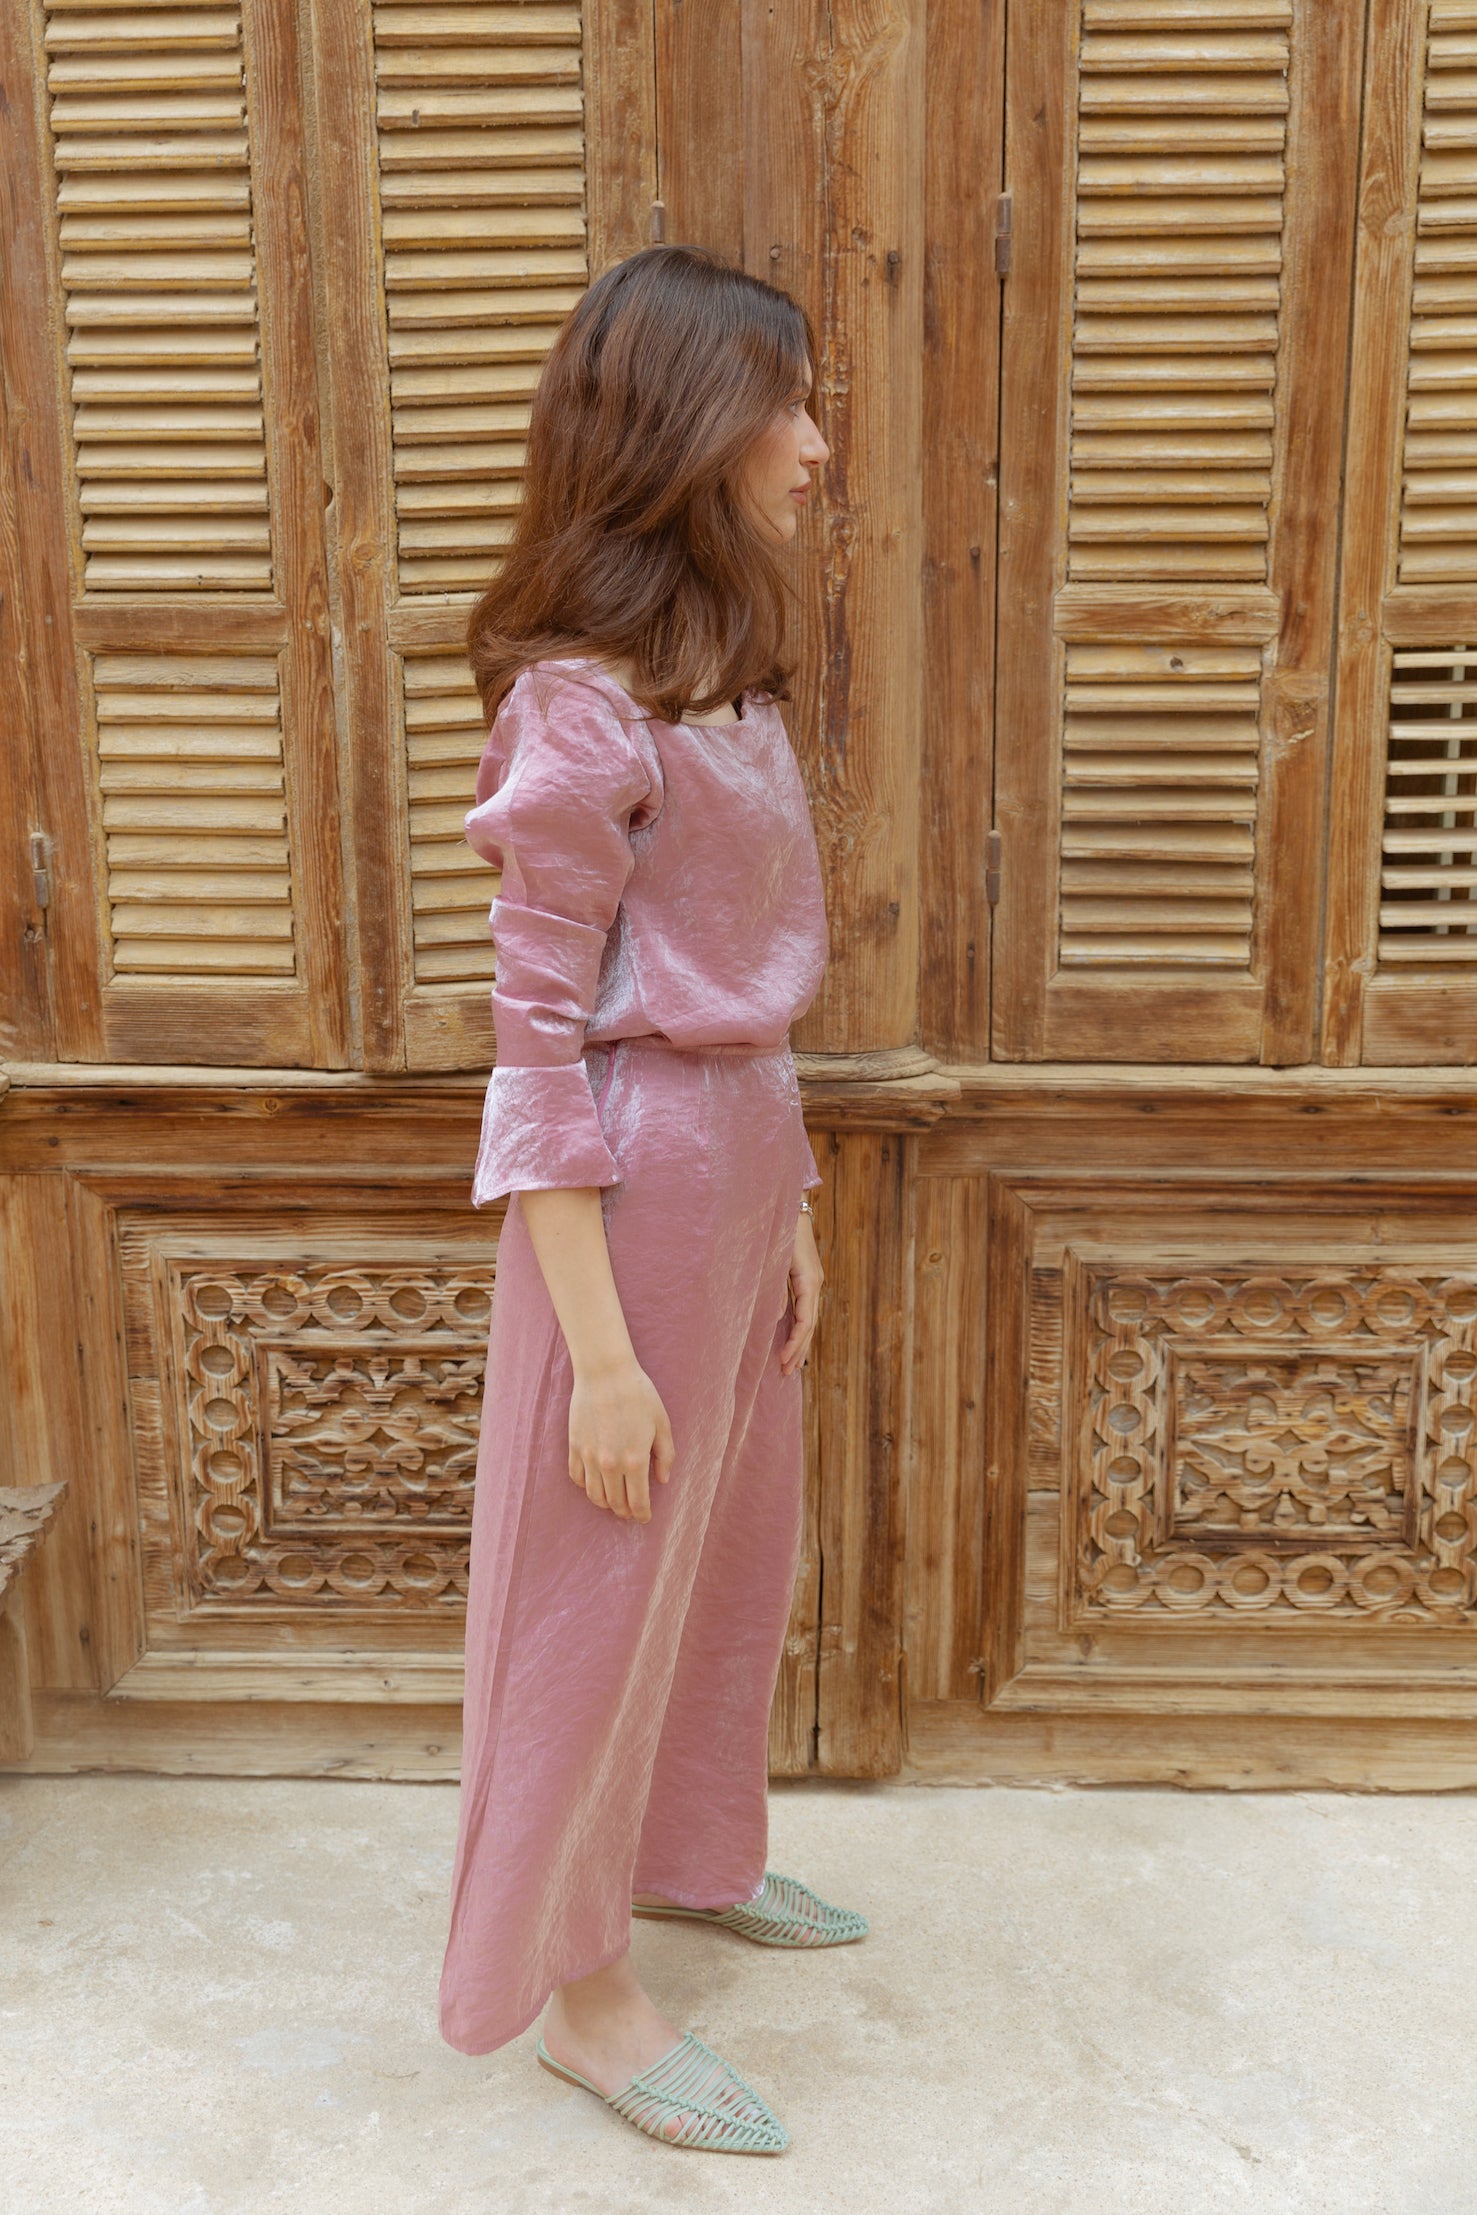 Shimmery maxi skirt in pink